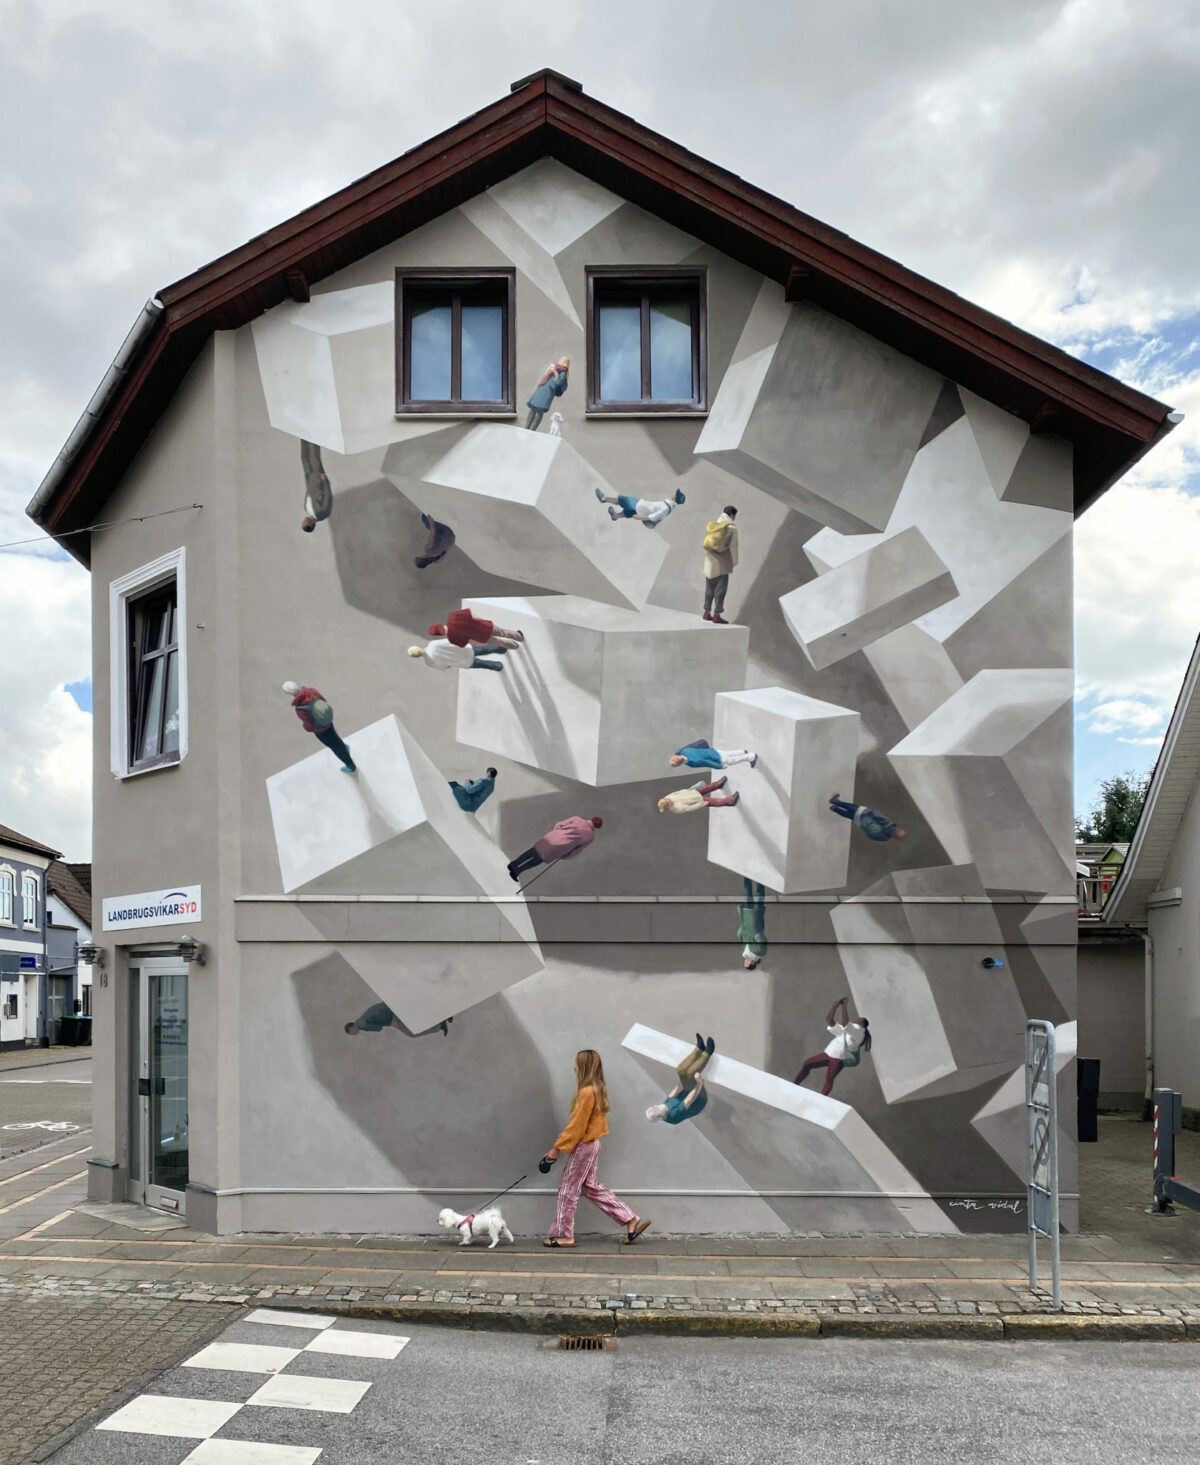 Surreal murals of floating objects and distorted architectural structures by Cinta Vidal